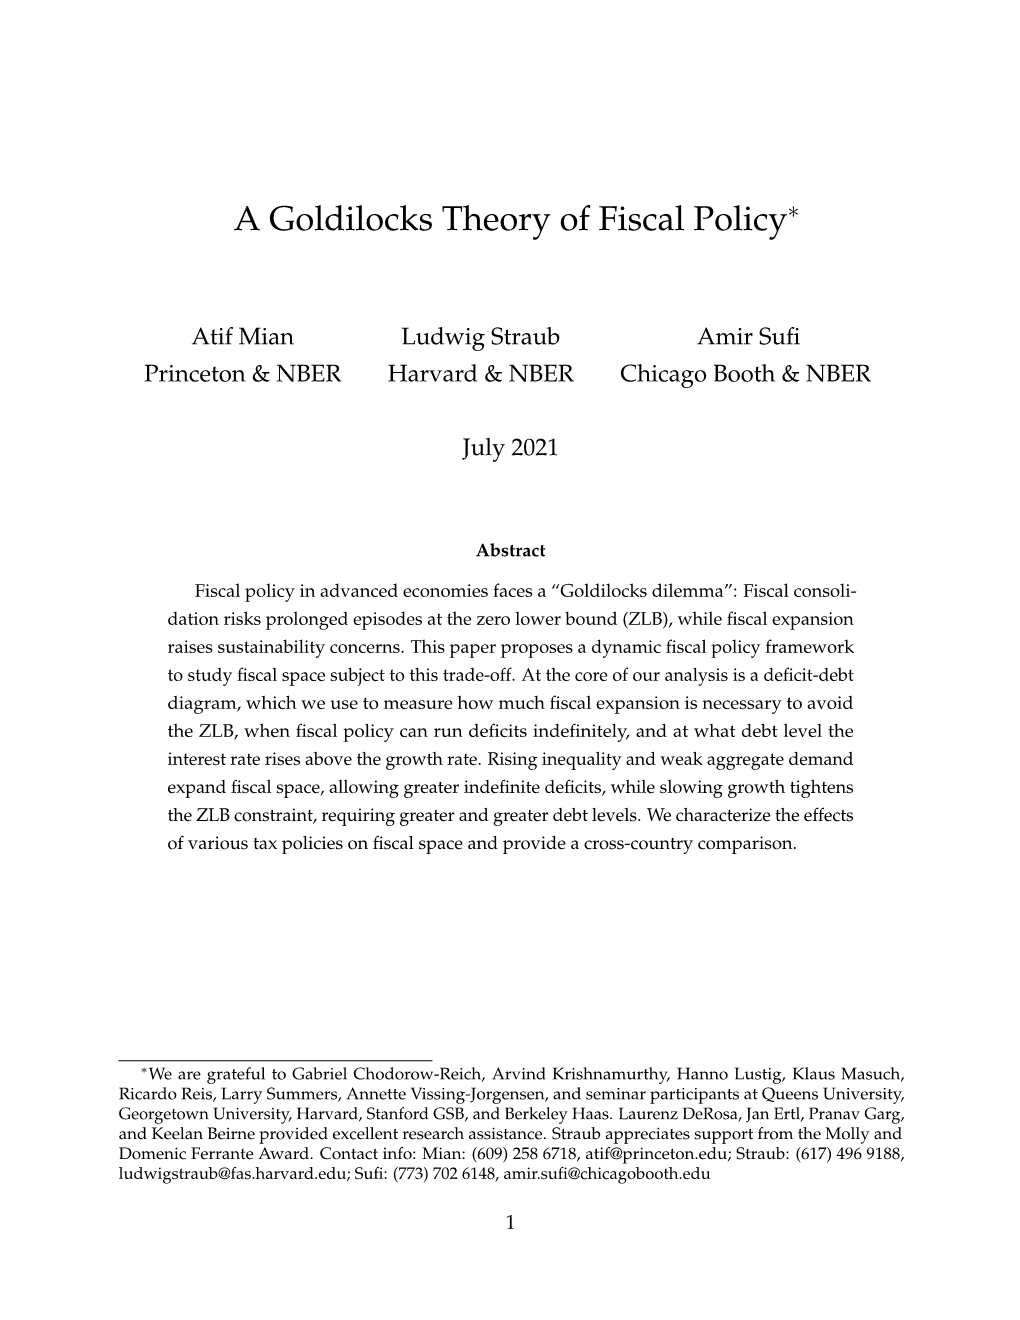 A Goldilocks Theory of Fiscal Policywe Are